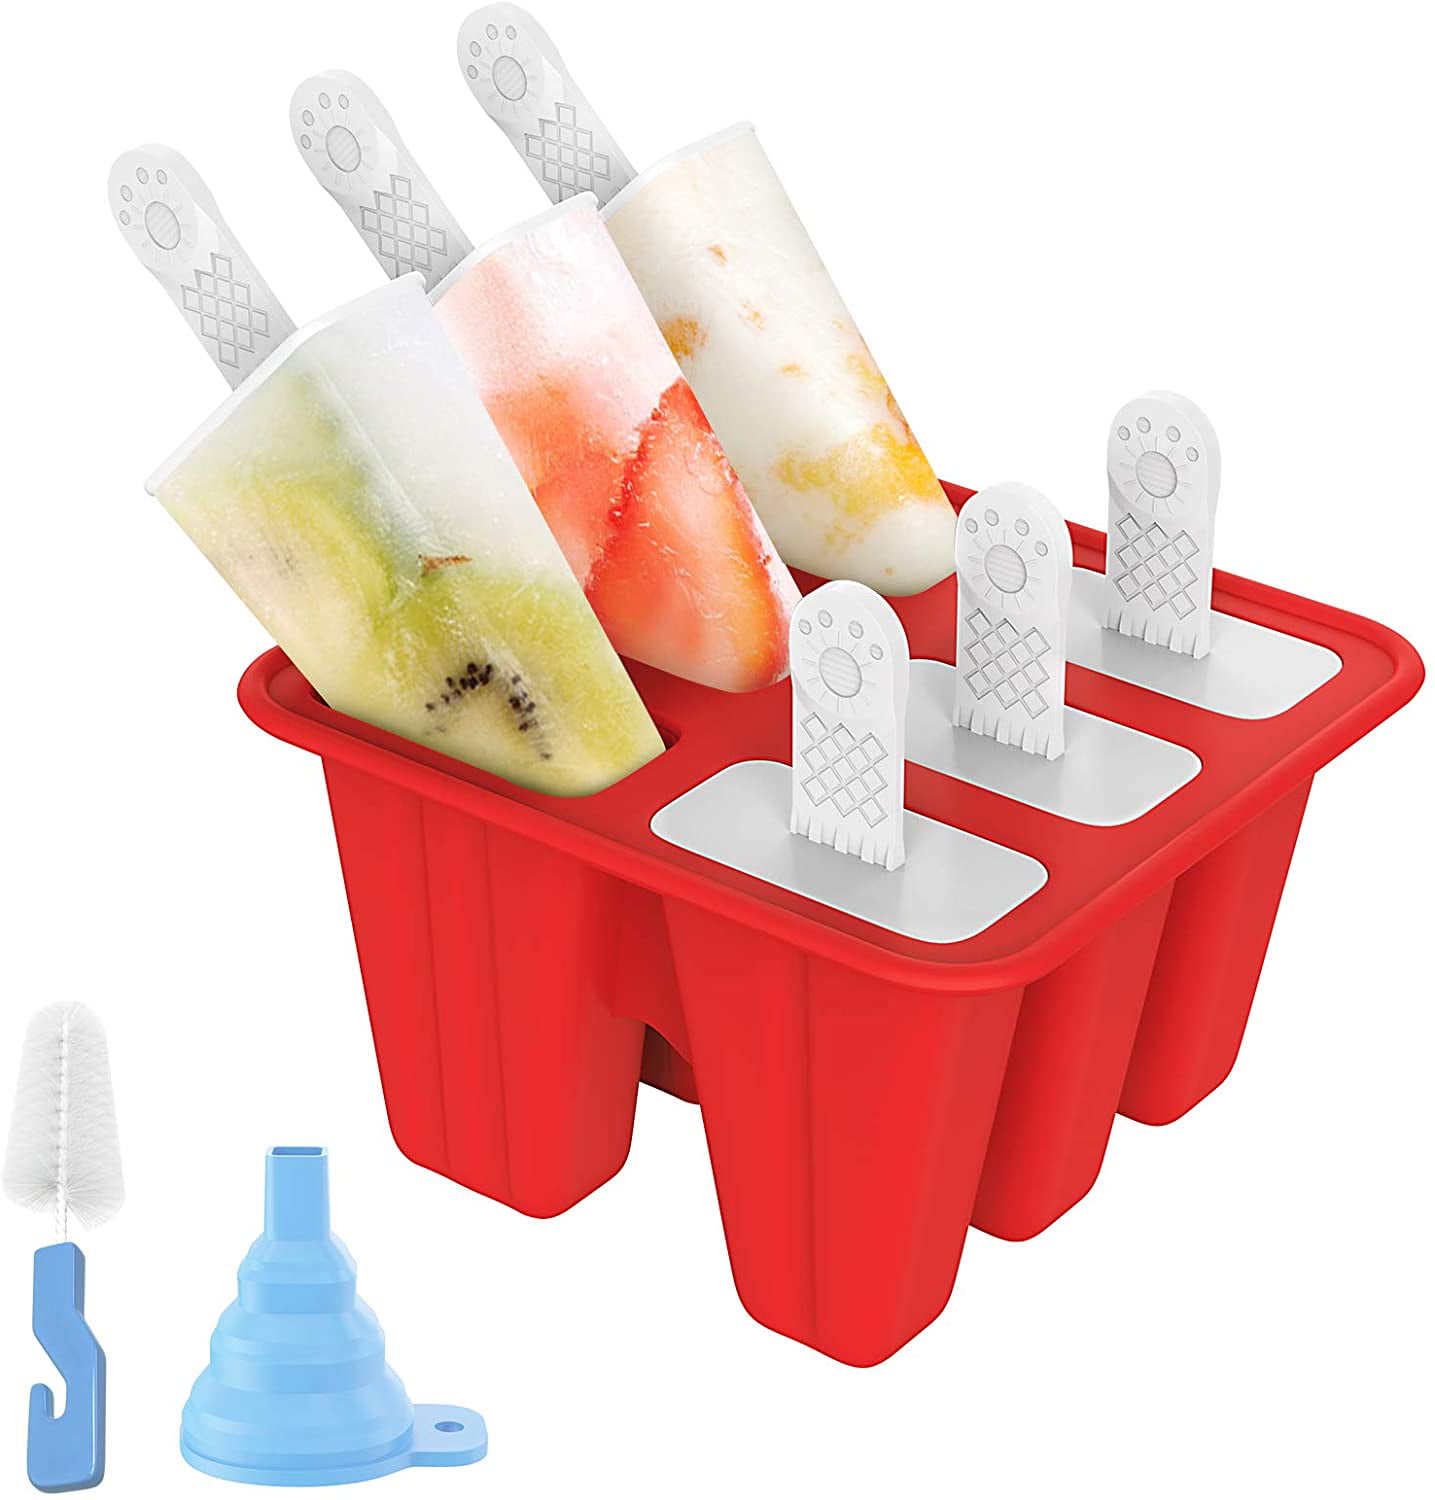 Brush Ice Cream Popsicle Frozen Mold Silicone Lolly Pop Maker Mould Ice Tray 